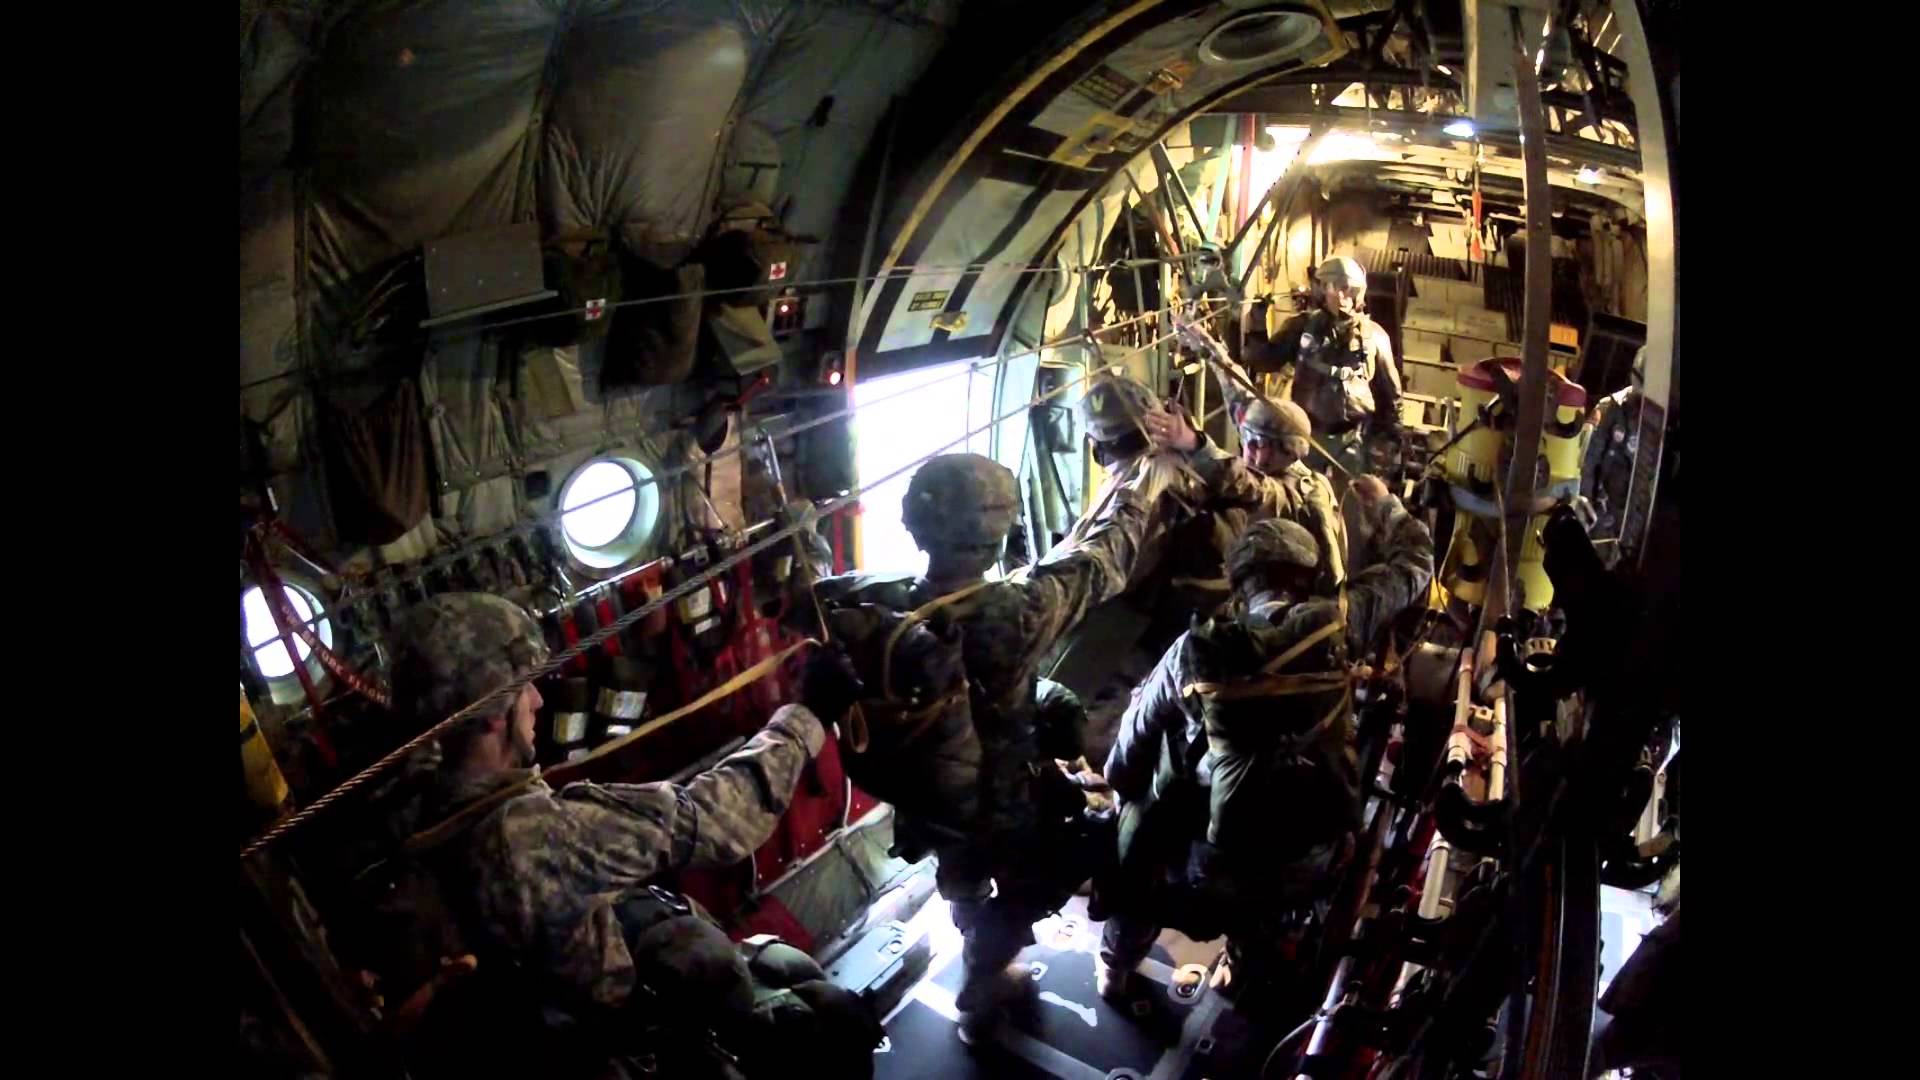 82nd Airborne Wallpaper Joax Bct